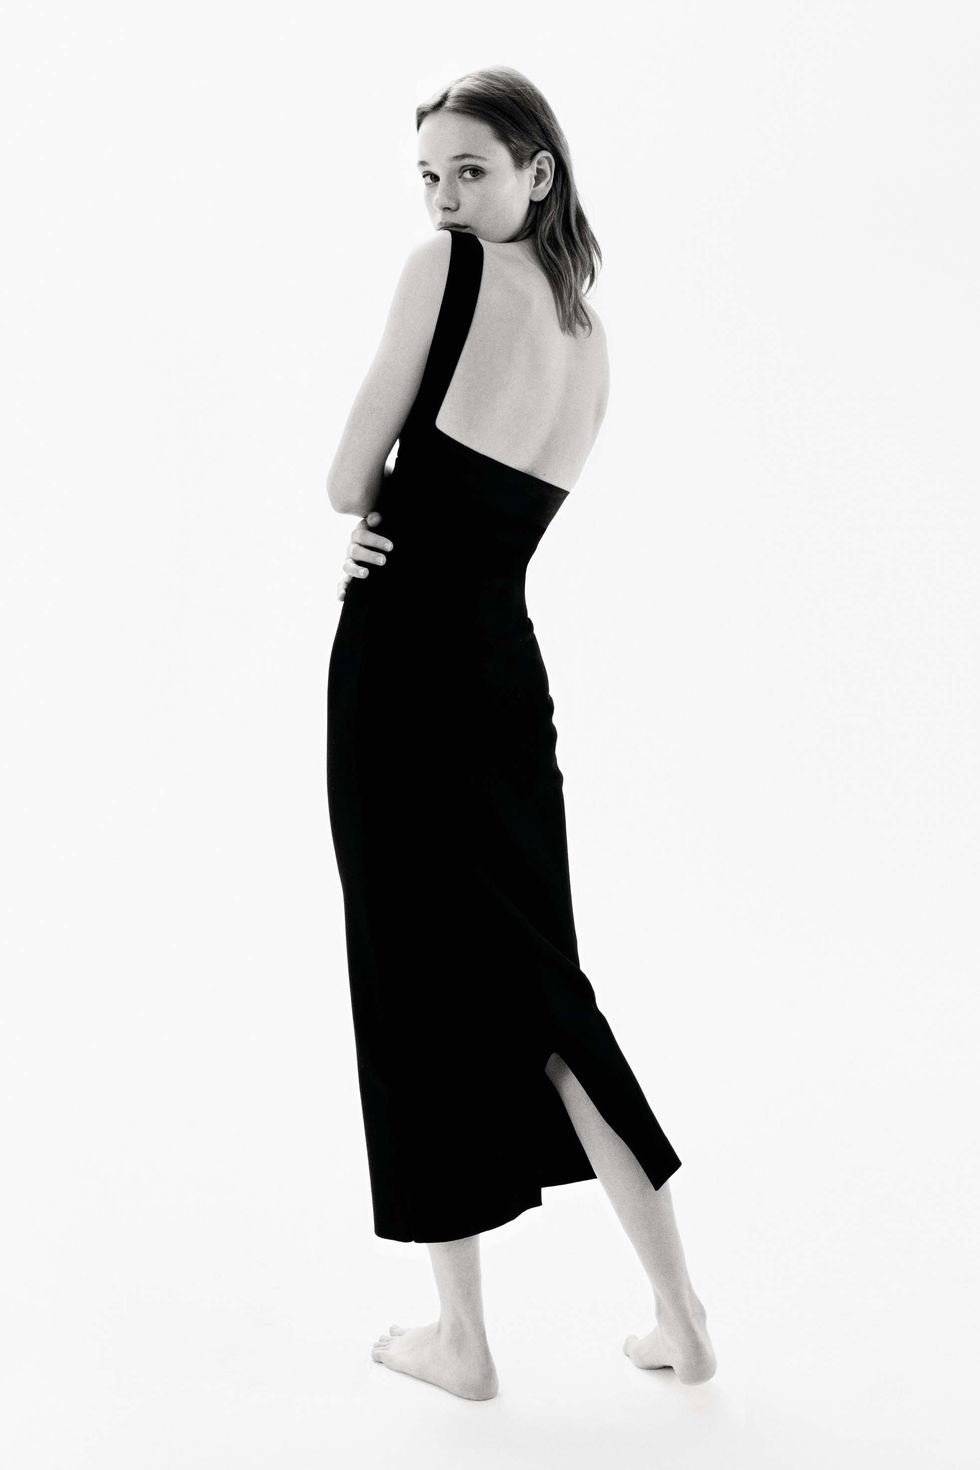 Victoria Beckham launches VB Body, a capsule of affordable basics